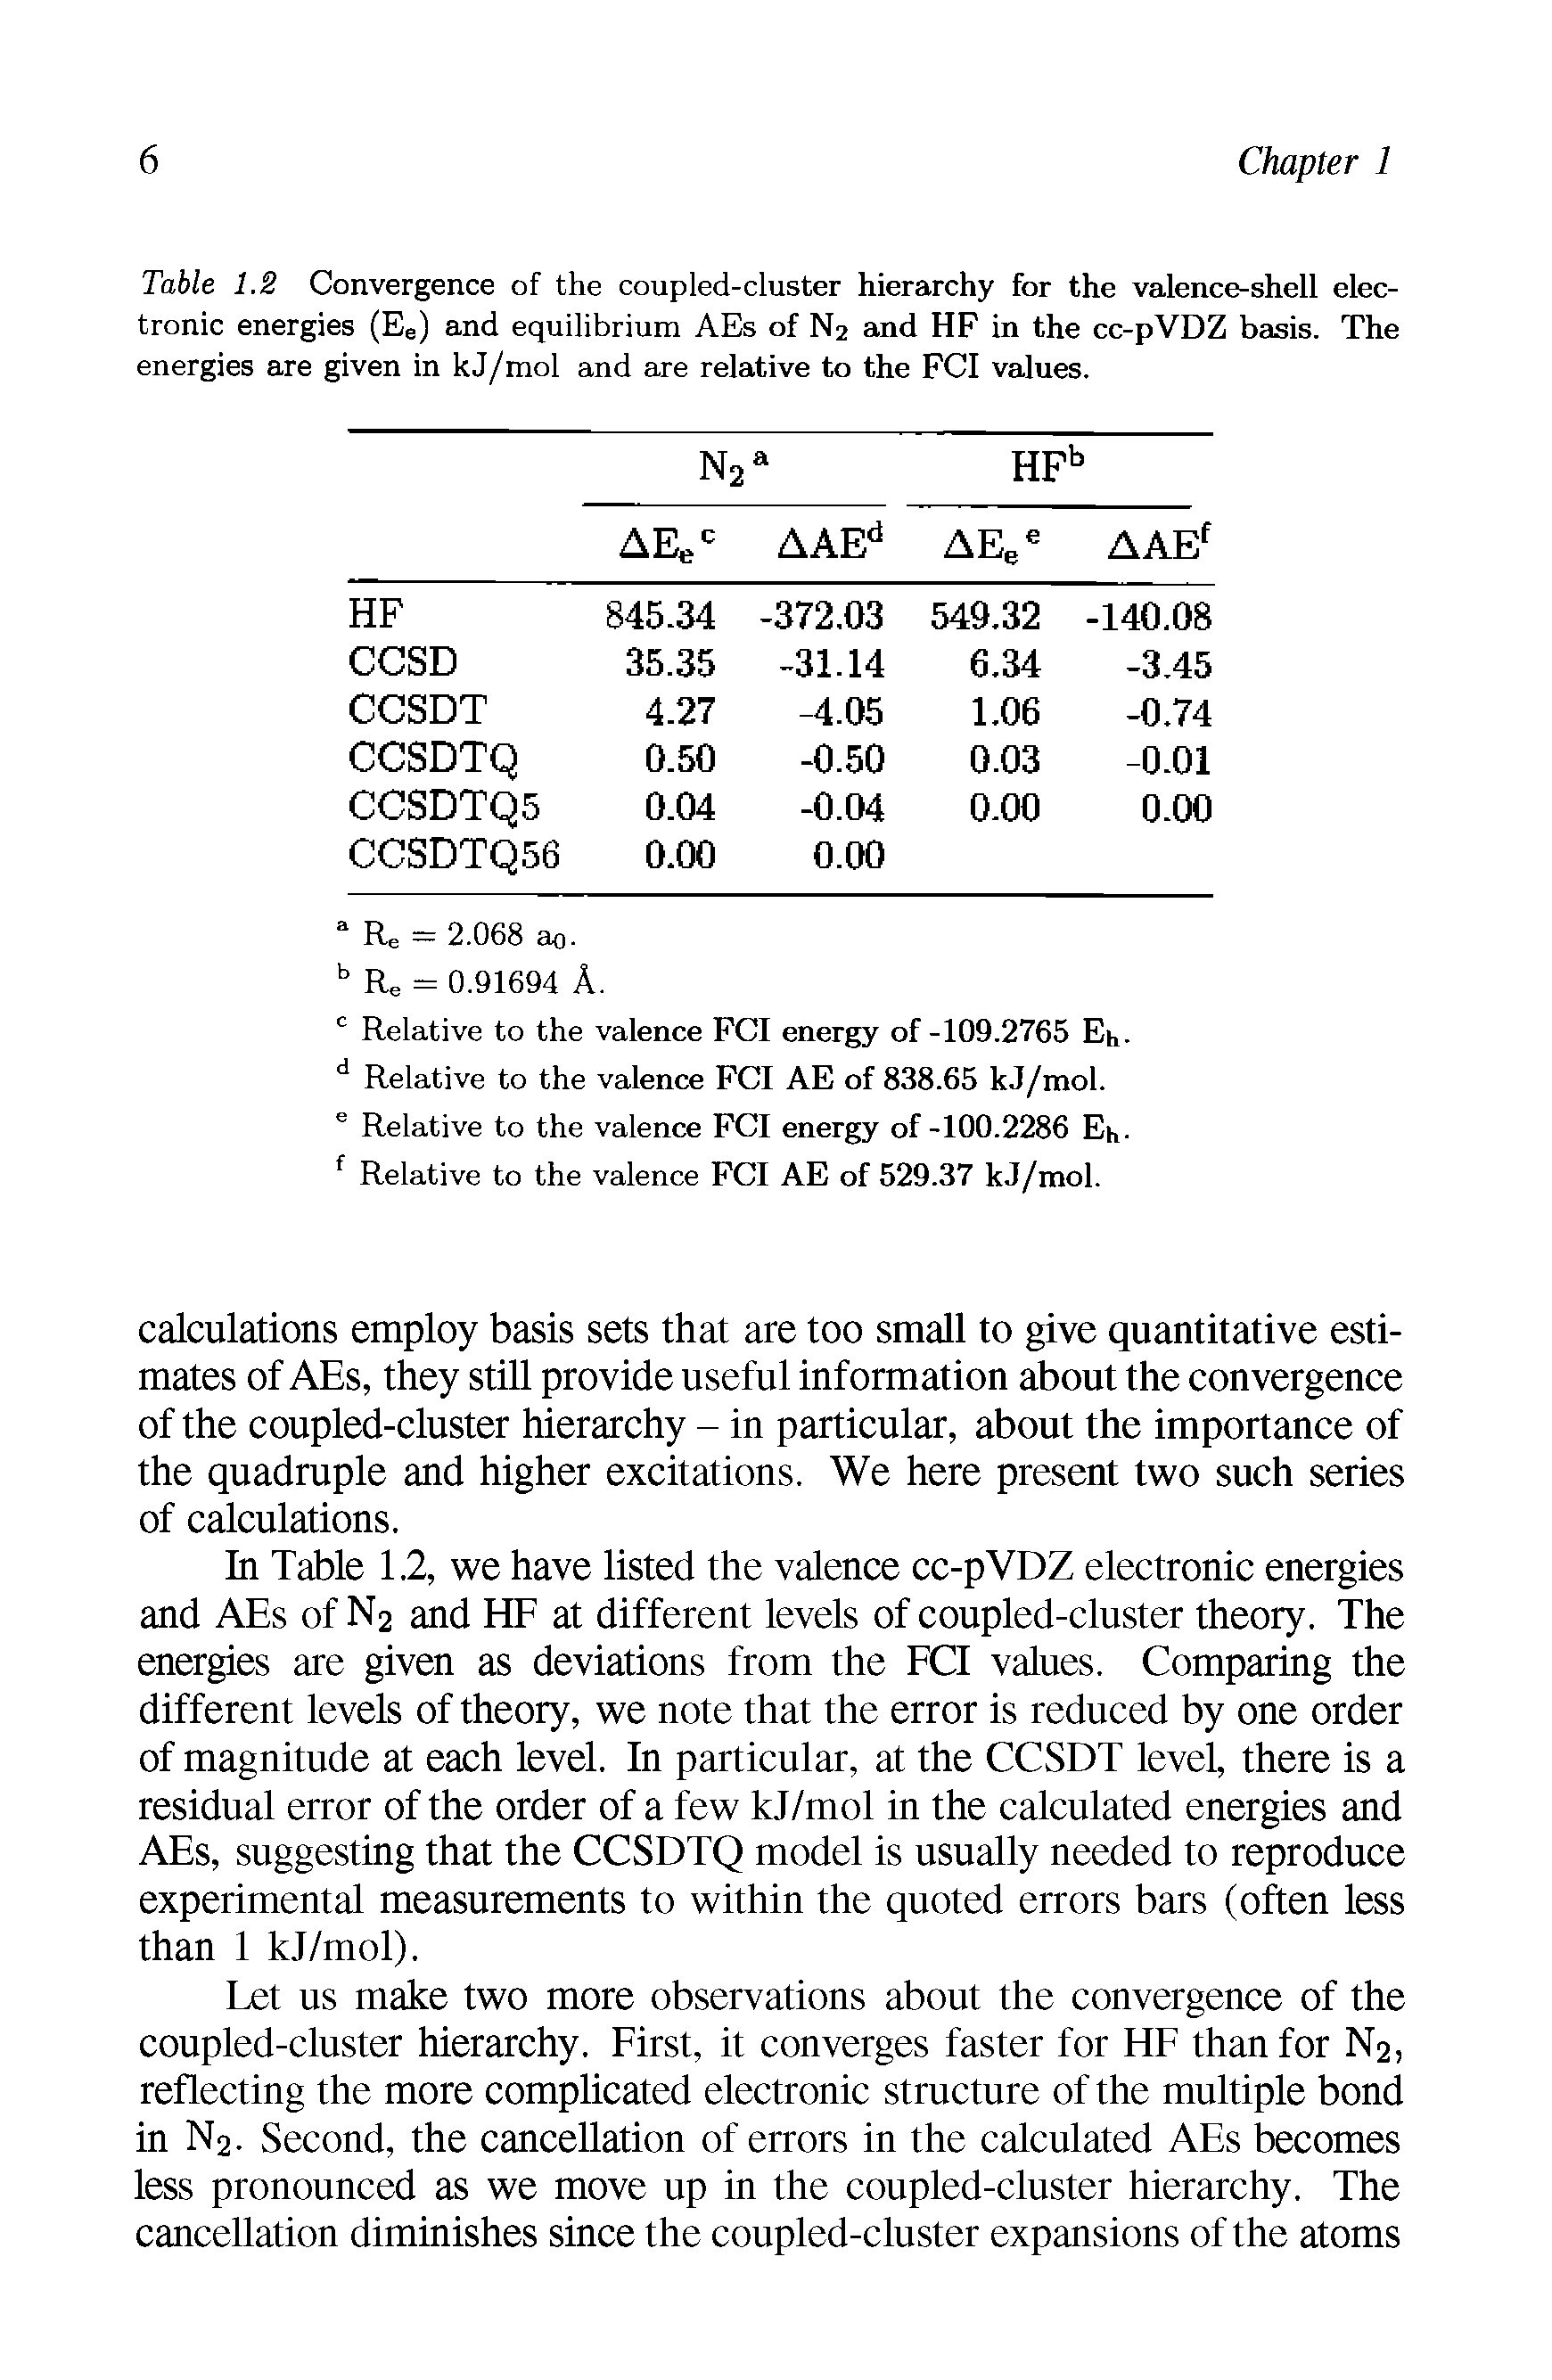 Table 1.2 Convergence of the coupled-cluster hierarchy for the valence-shell electronic energies (Ee) and equilibrium AEs of N2 and HF in the cc-pVDZ basis. The energies are given in kJ/mol and are relative to the FCI values.